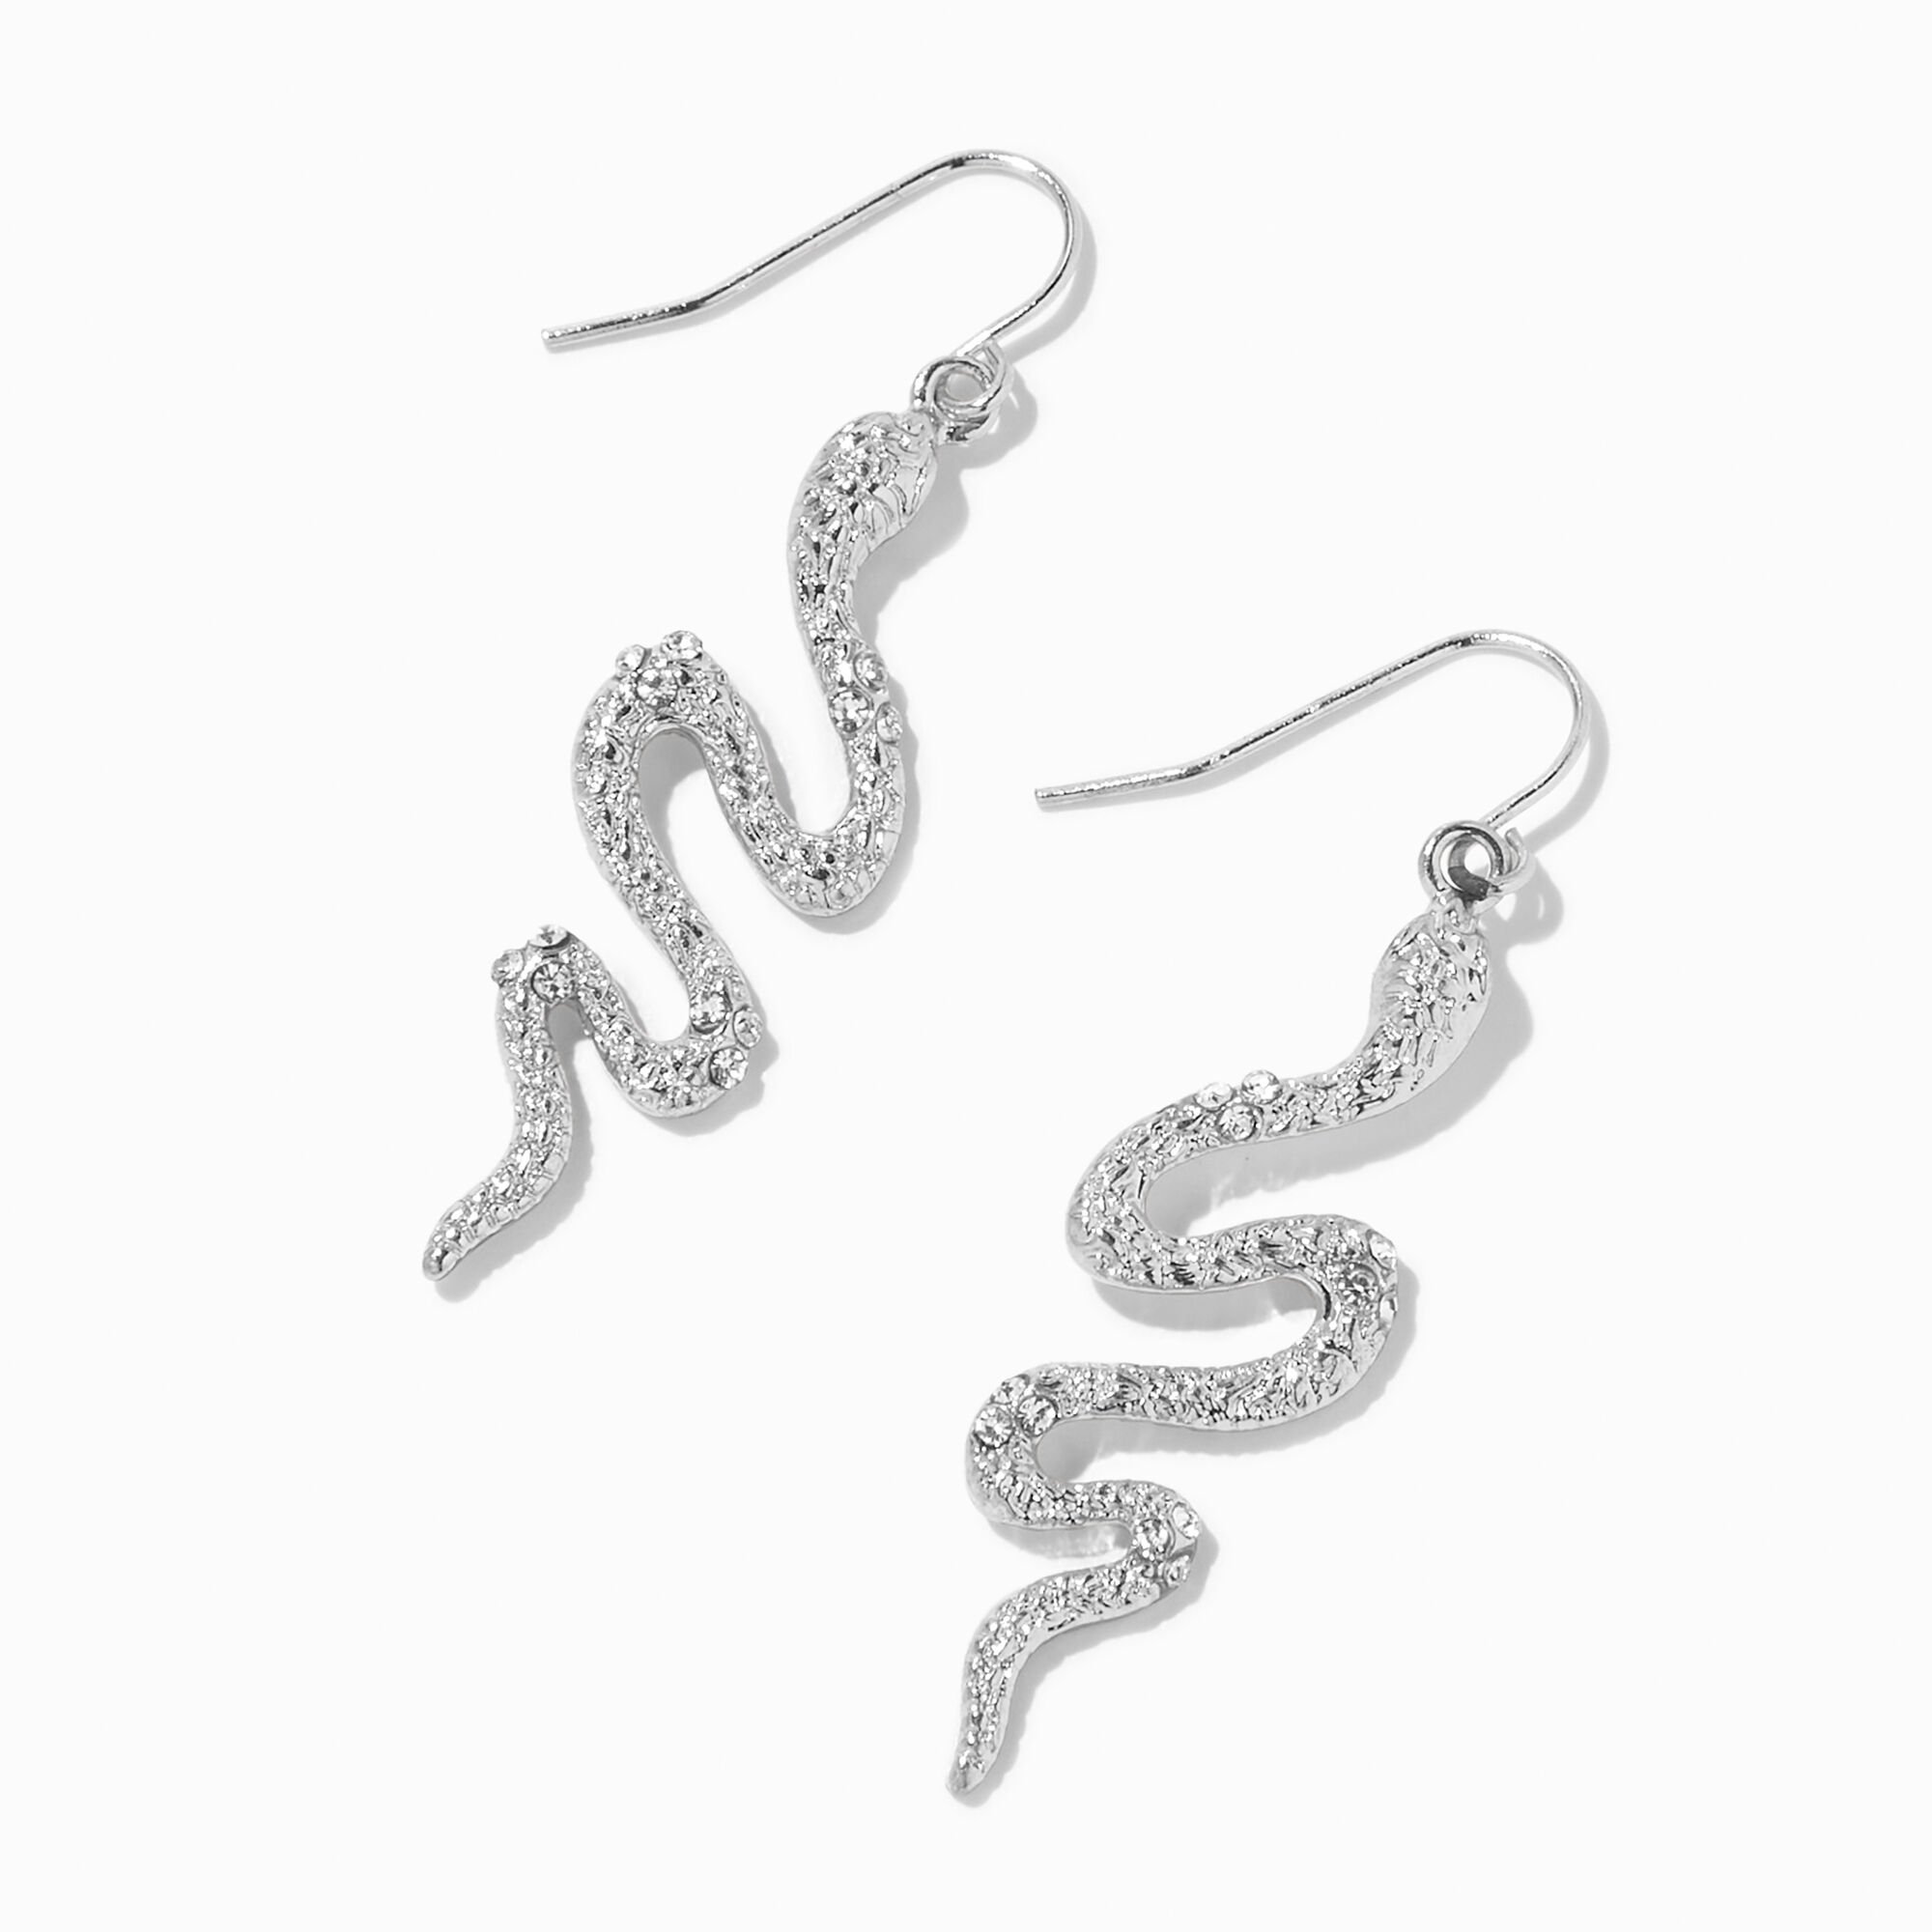 View Claires Tone 15 Embellished Snake Drop Earrings Silver information